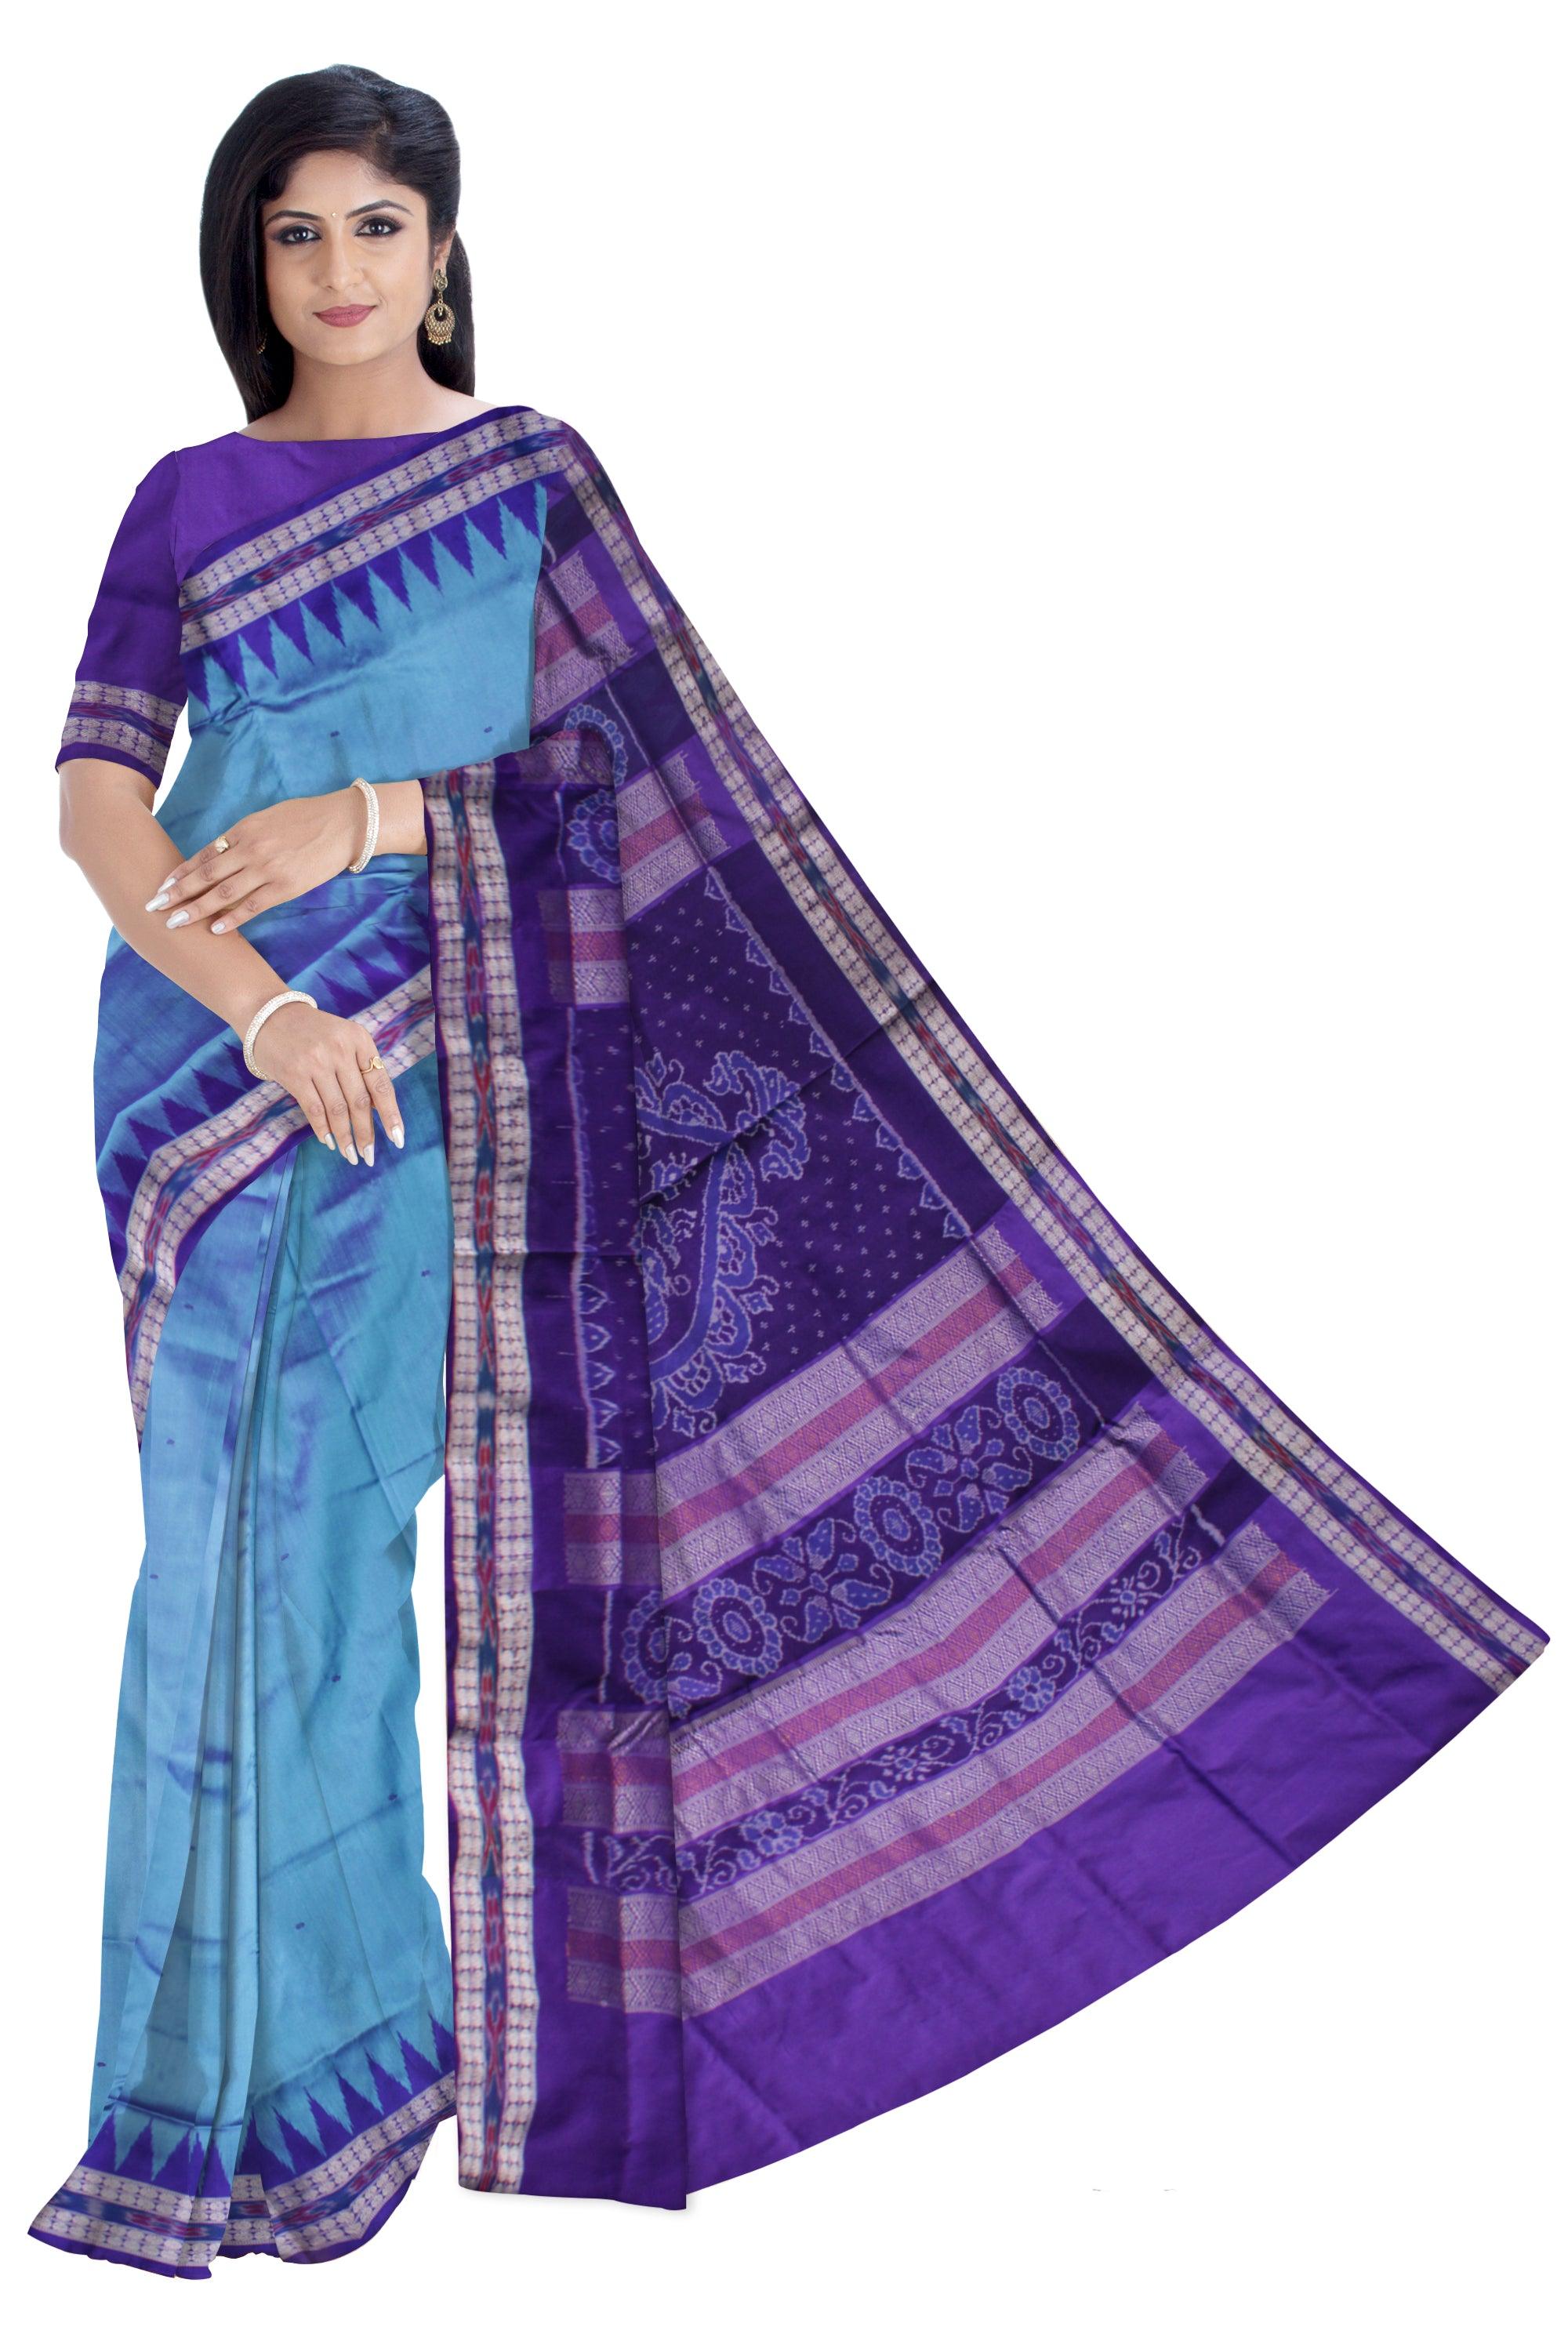 SKY AND BLUE COLOR SMALL BOOTY PATTERN PATA SAREE, WITH BLOUSE PIECE. - Koshali Arts & Crafts Enterprise